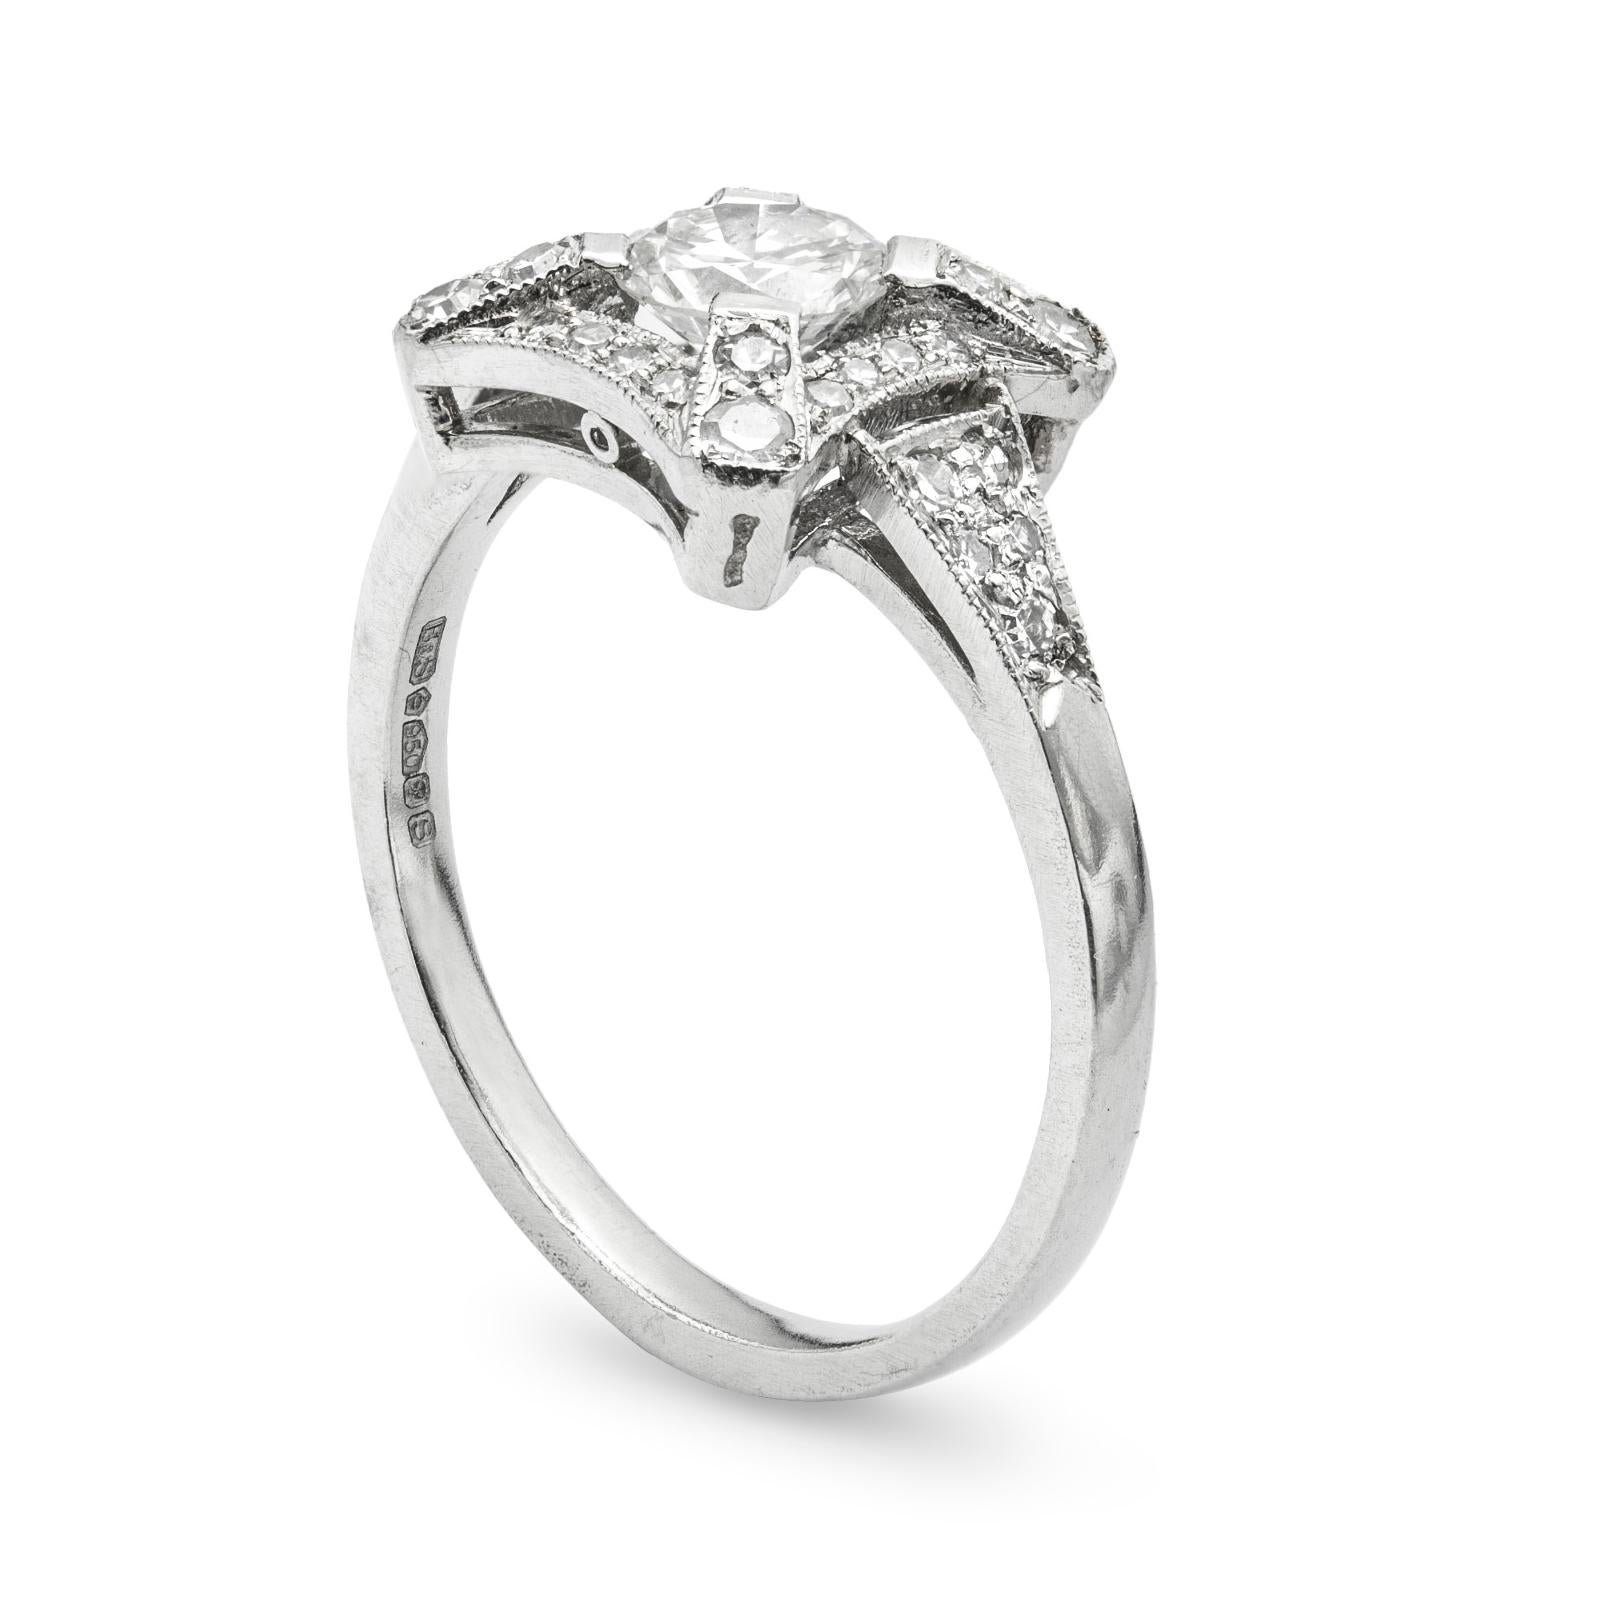 An Art Deco style diamond square cluster ring, the central old brilliant-cut diamond estimated to weigh 0.50 carats, claw-set to the centre of an openwork diamond-set square frame, with diamond-set shoulders, all millegrain-set to a platinum mount,